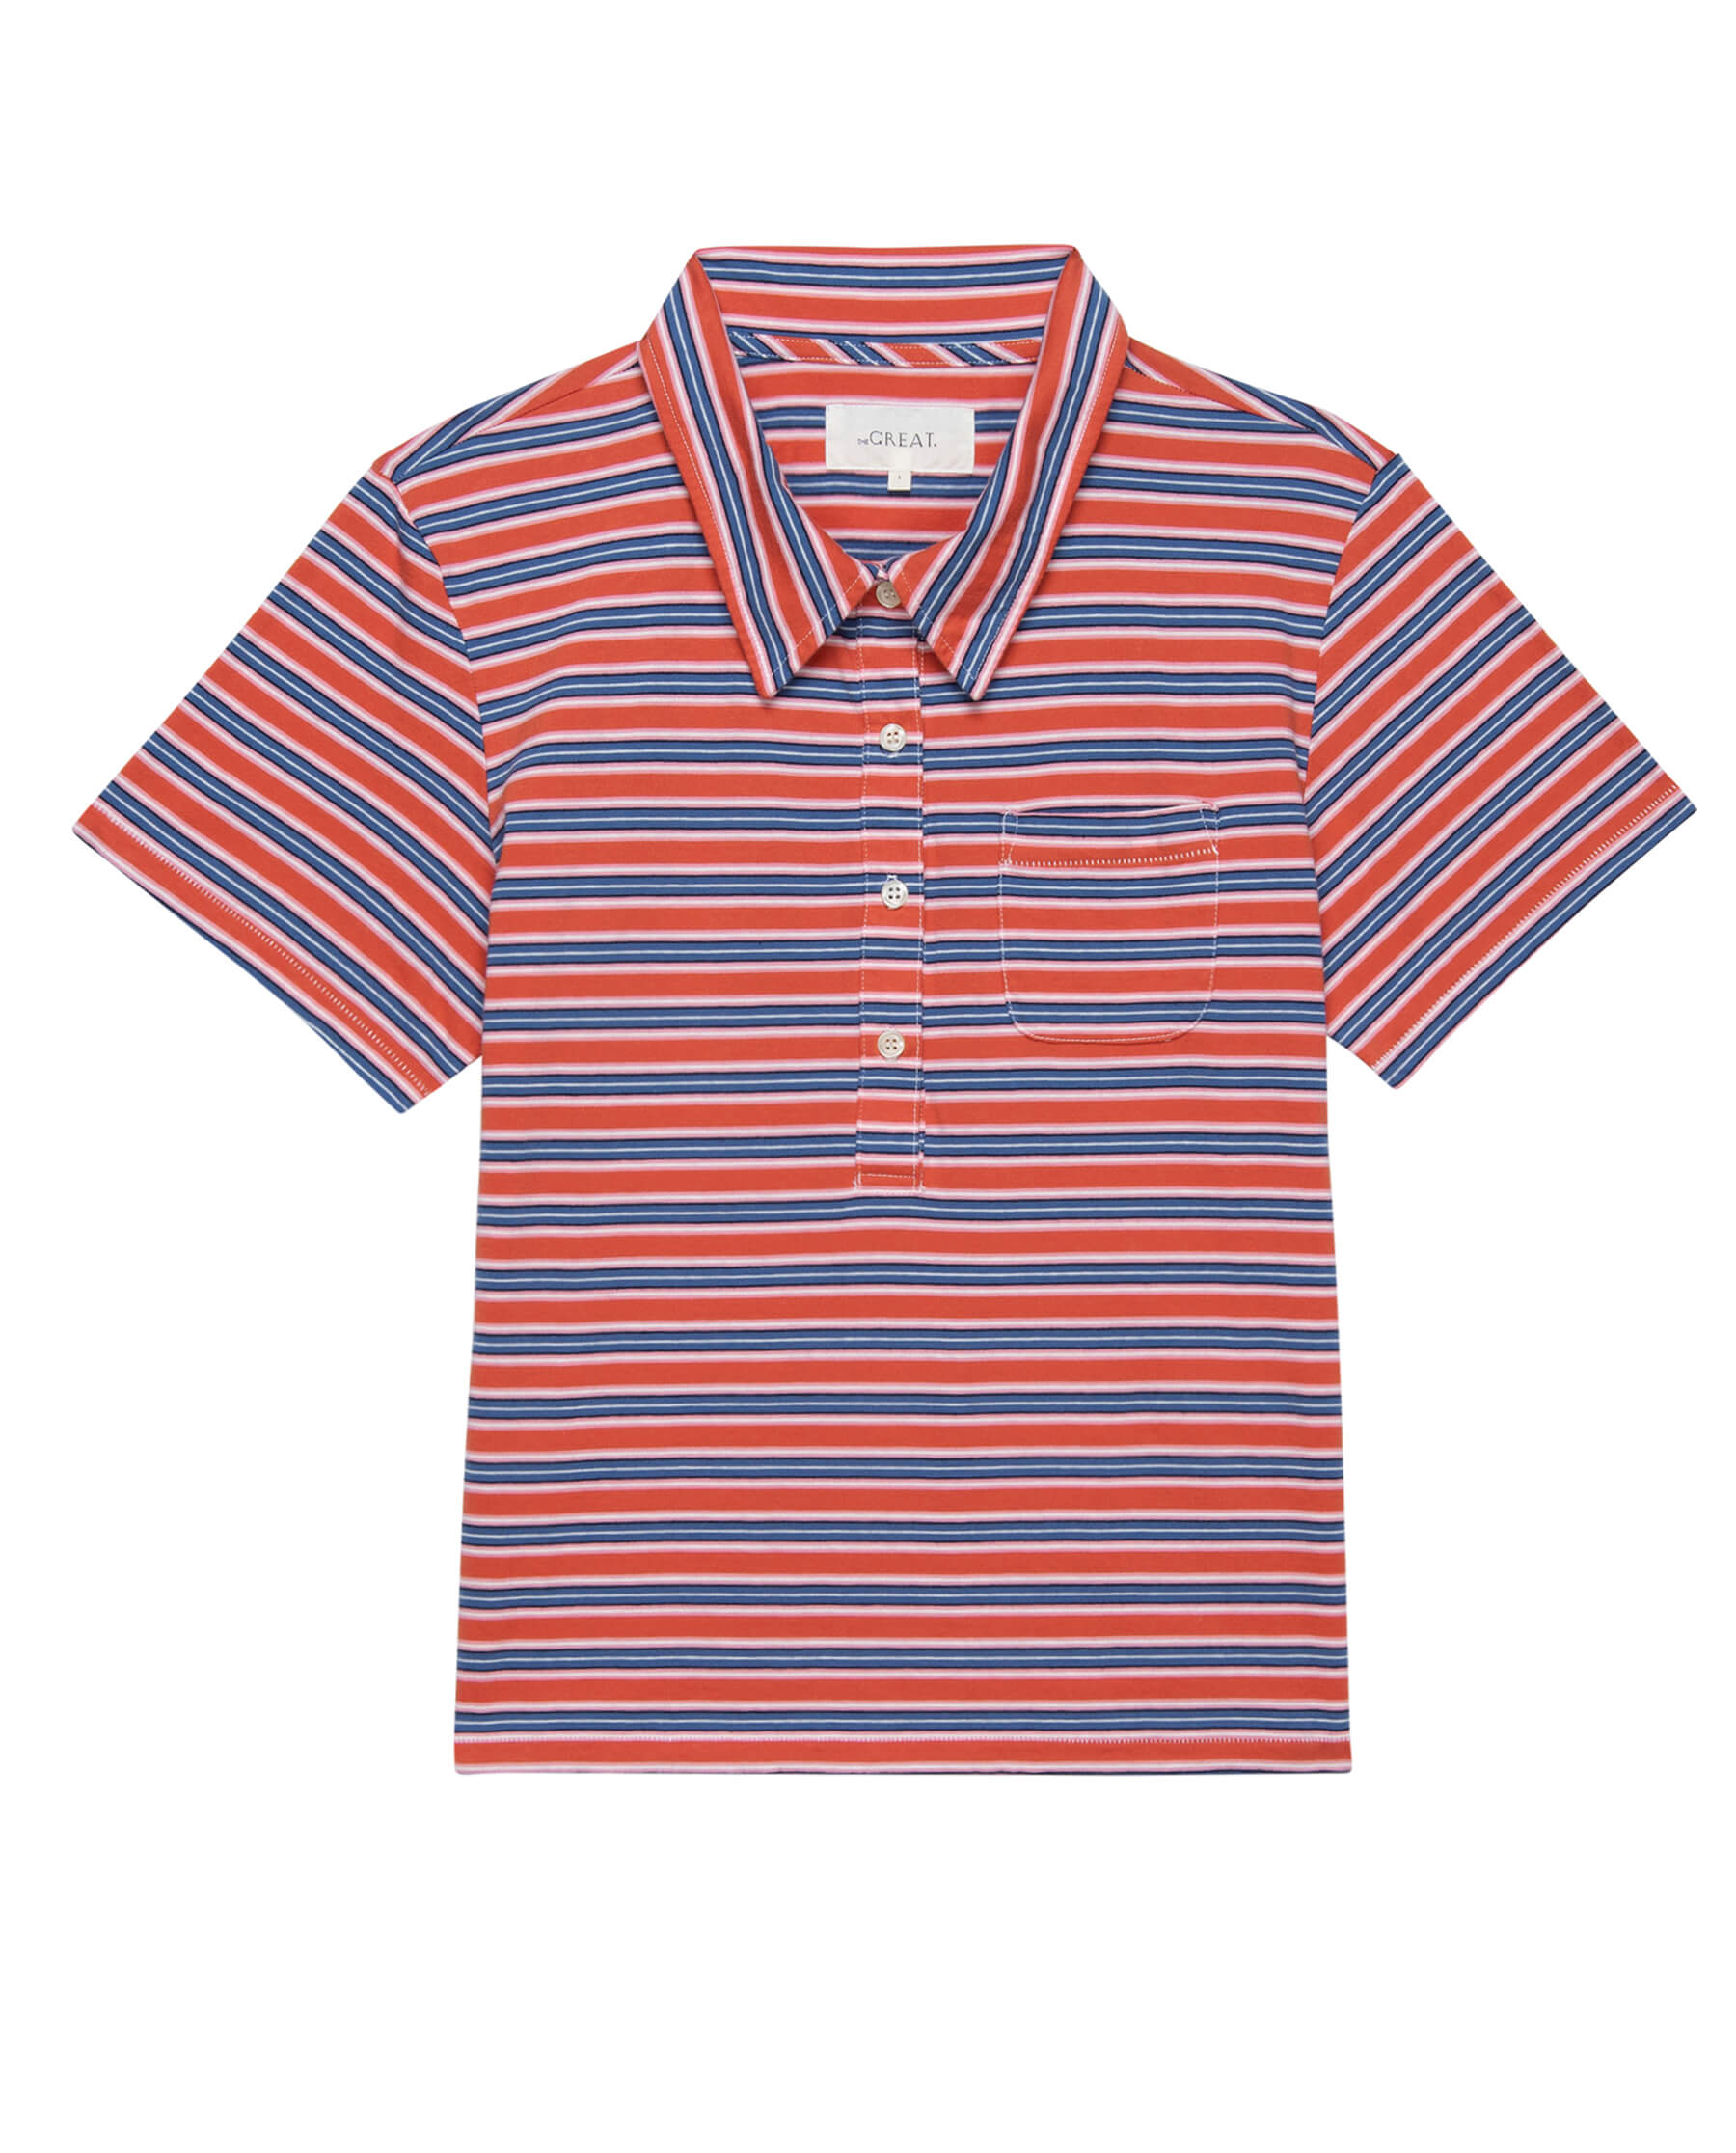 The Lacrosse Polo. -- Campervan Stripe TEES THE GREAT. SP24 D1